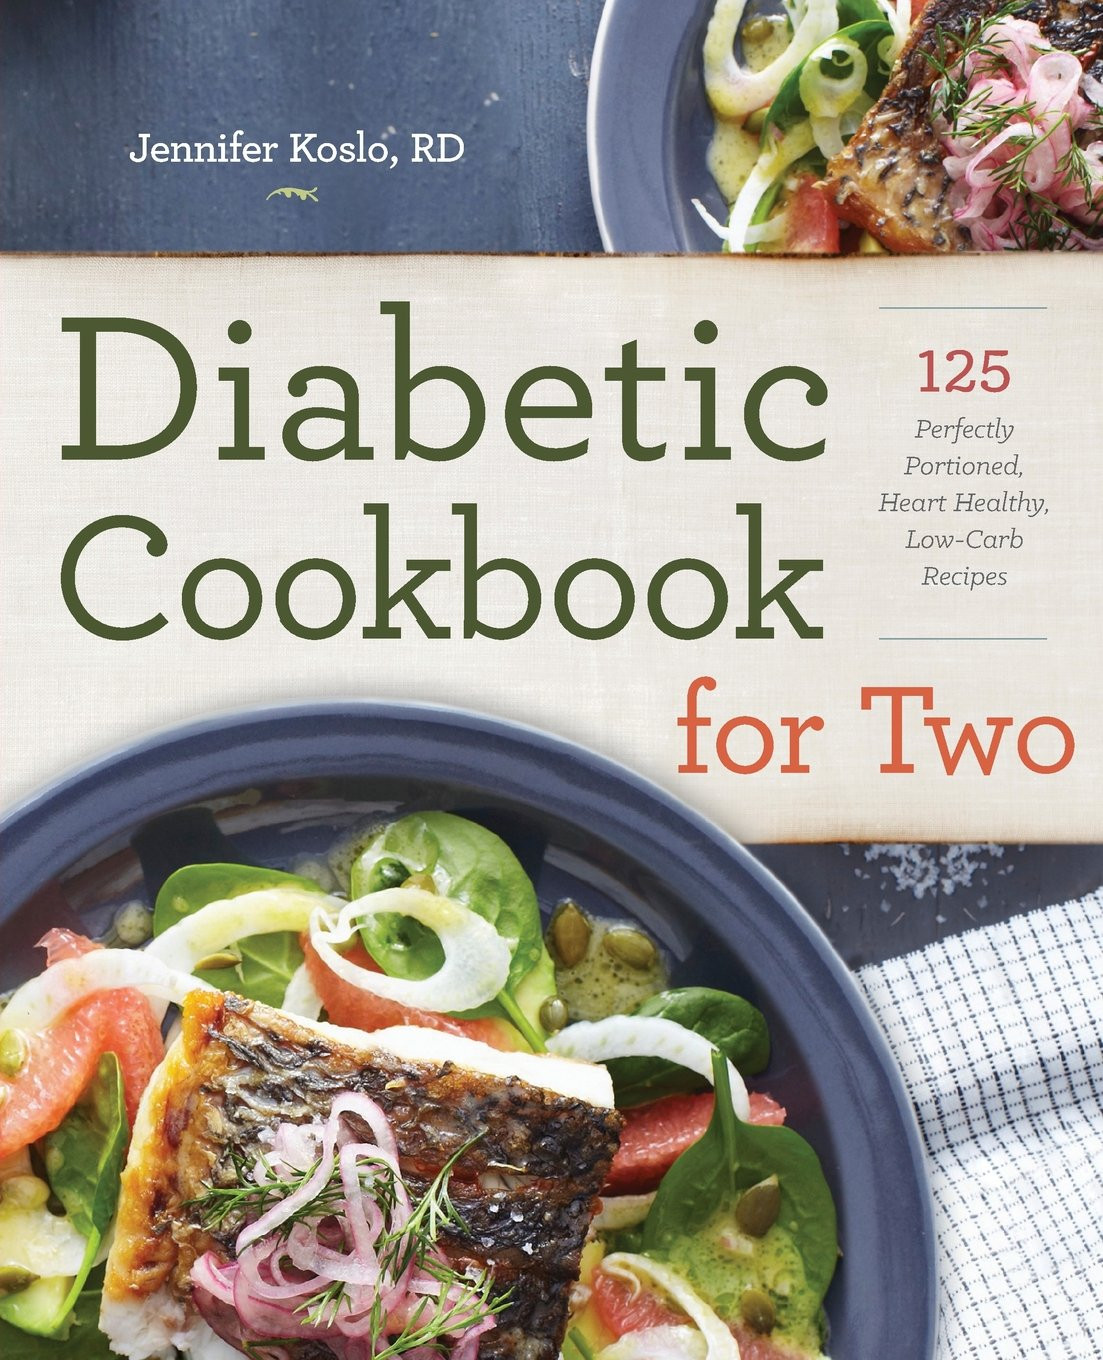 Diabetes Low Carb Recipes
 Diabetic Cookbook for Two 125 Perfectly Portioned Heart